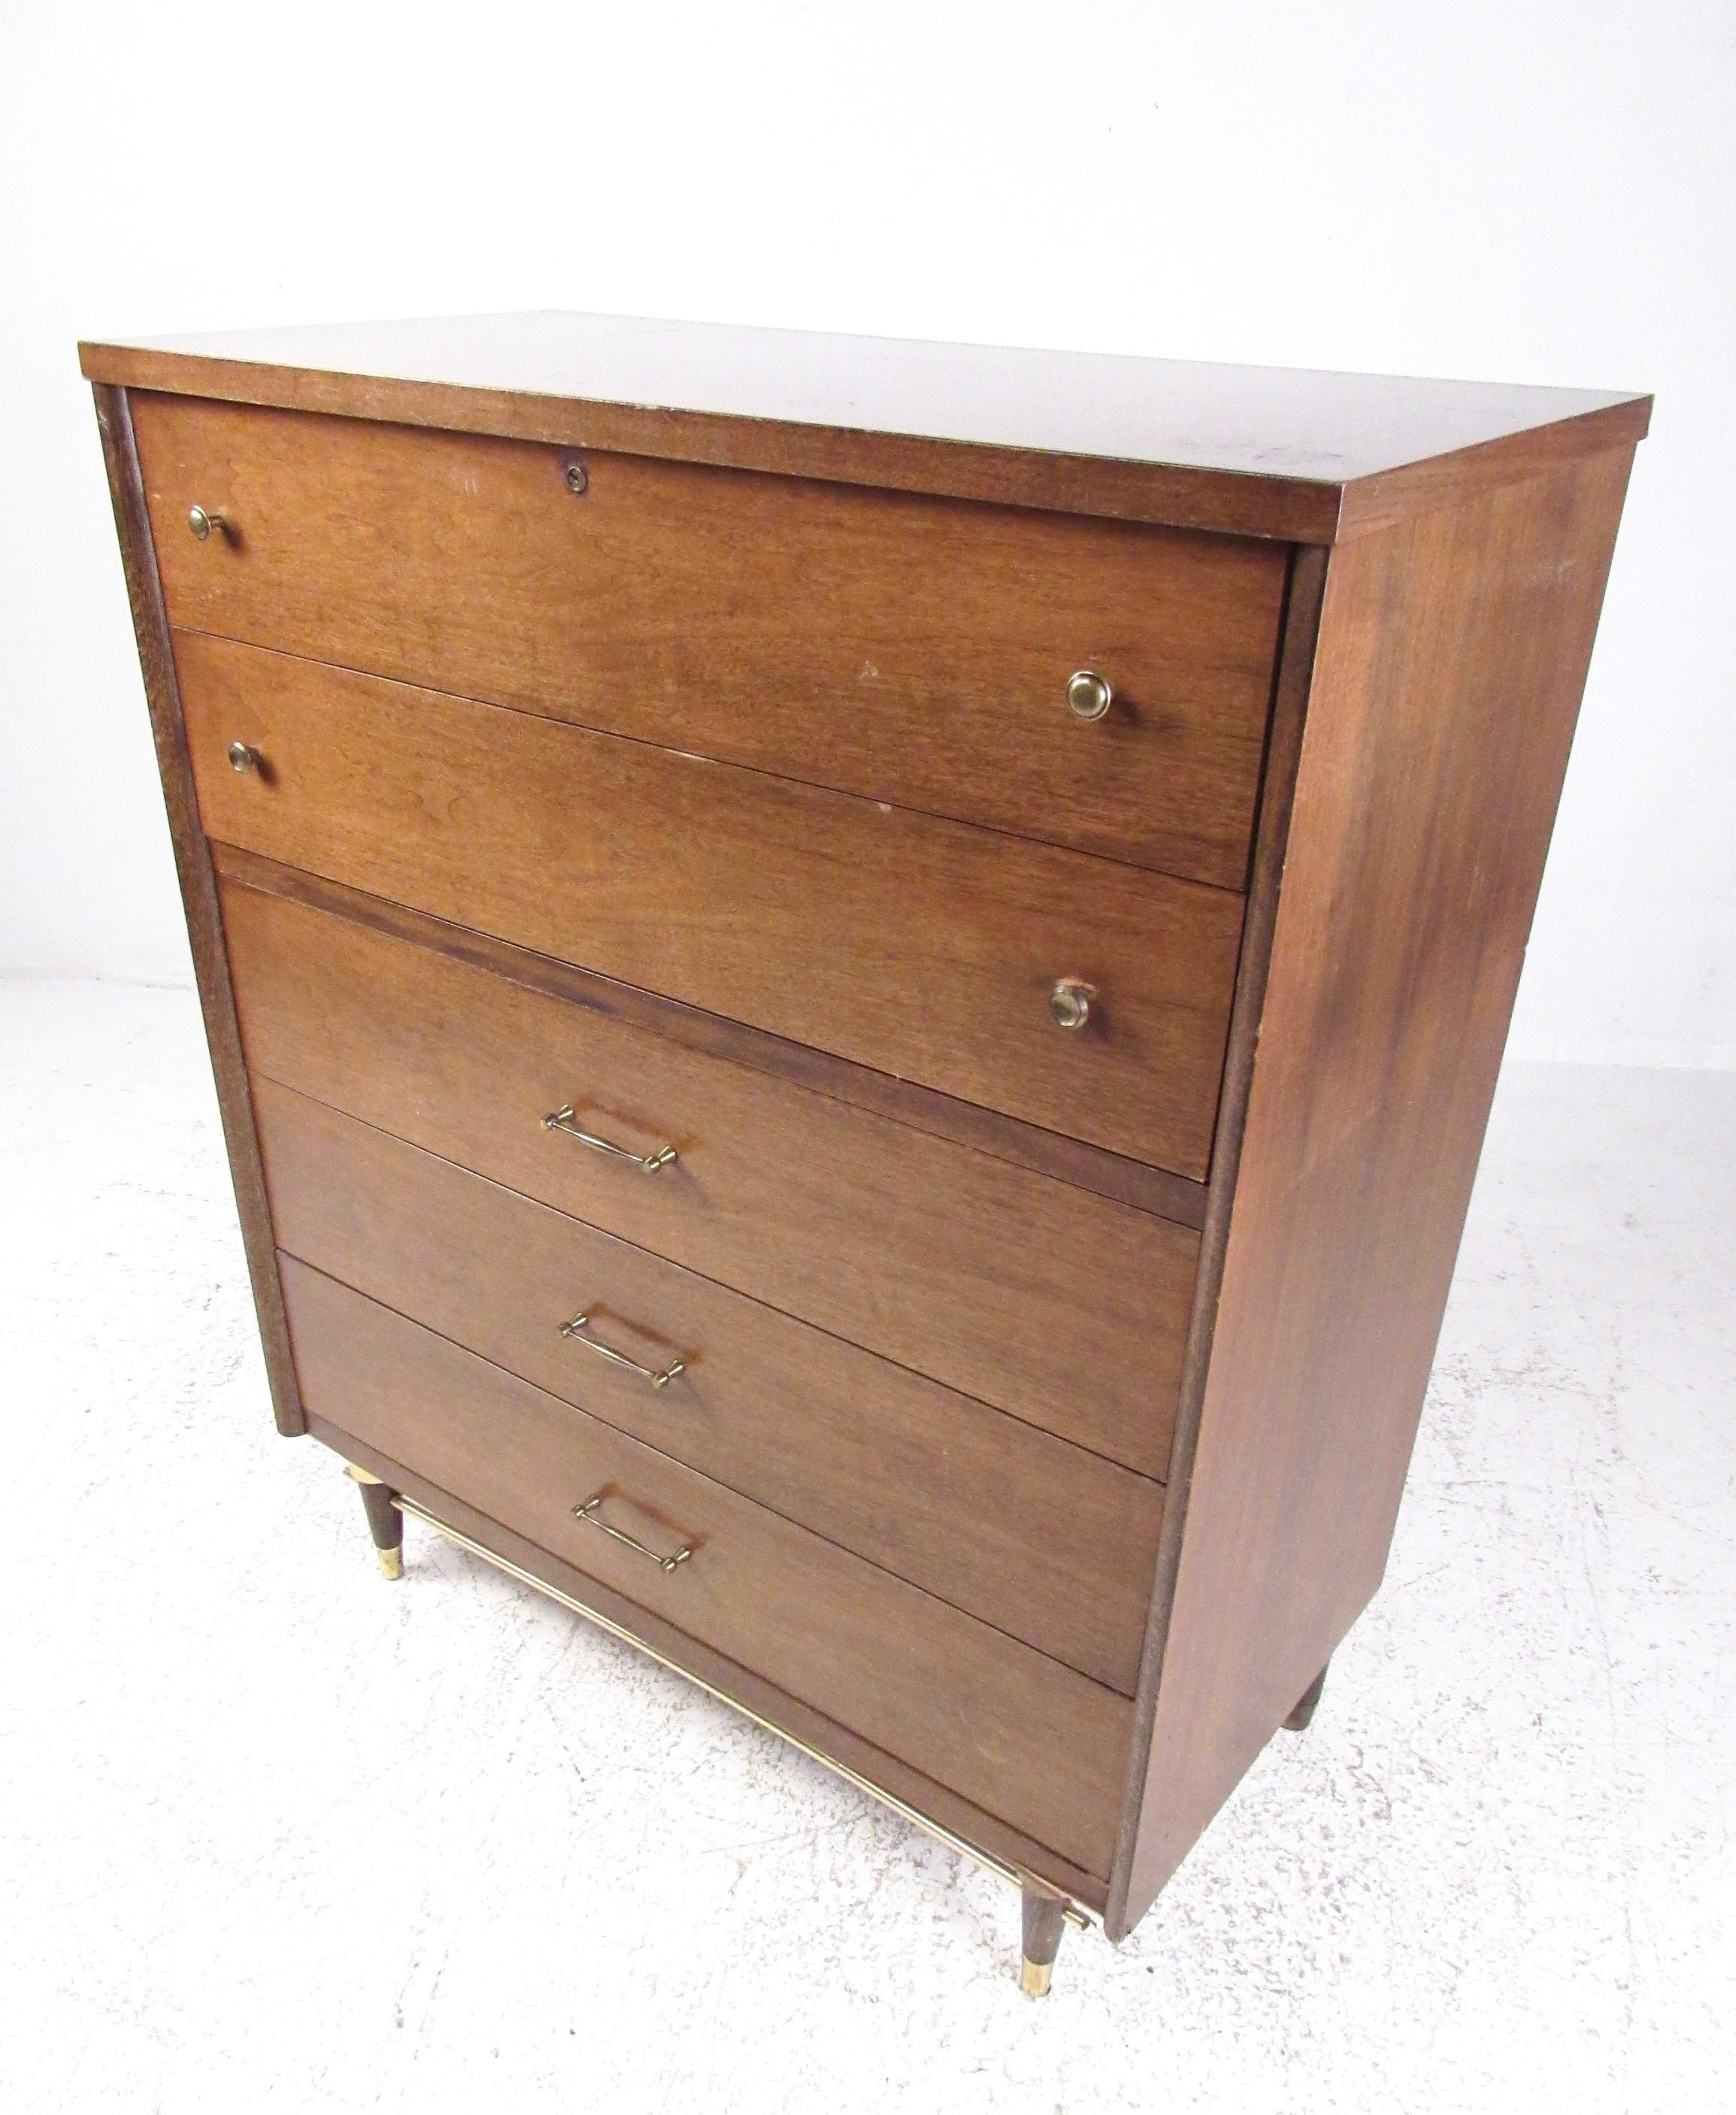 This vintage modern five-drawer highboy dresser features unique Mid-Century Modern design including walnut finish with brass details. Rounded drawer pulls and tapered legs add to the unique mid-mod appeal of this tall bedroom dresser. Please confirm